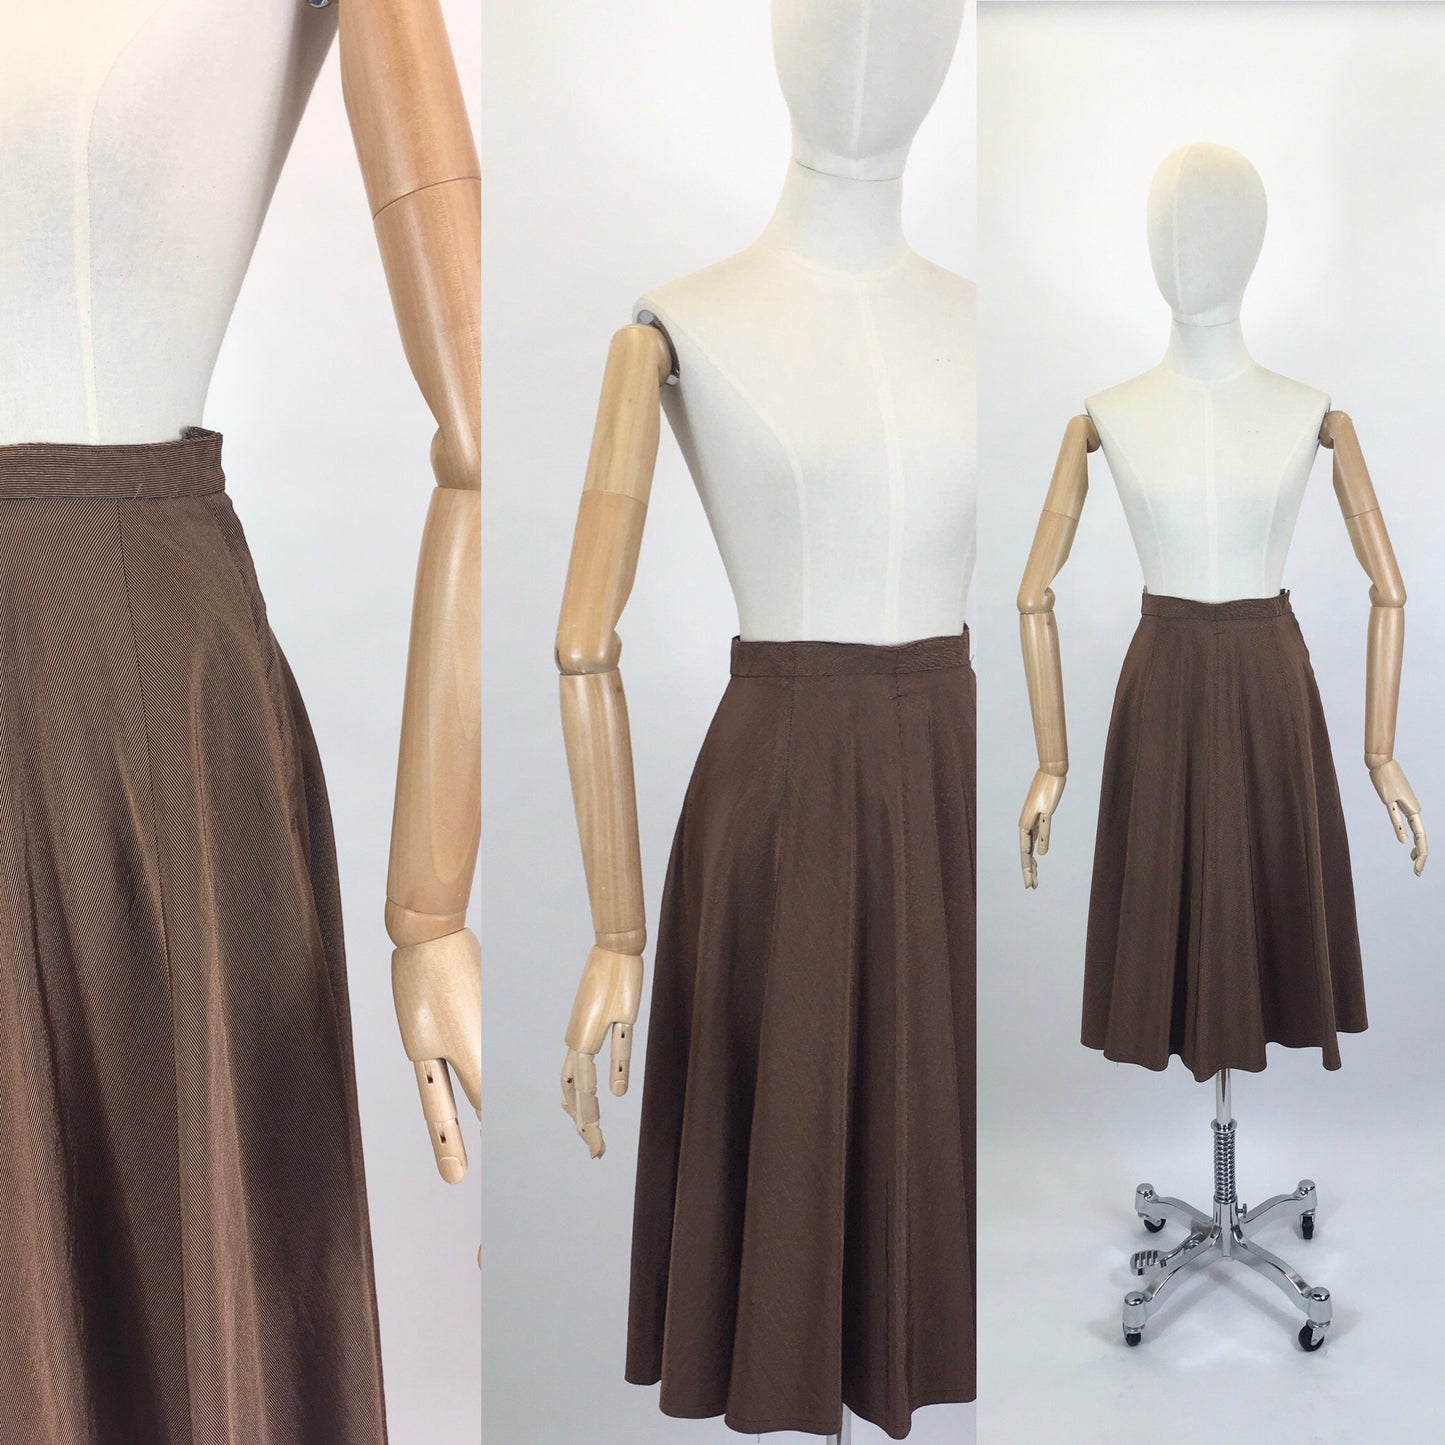 Original 1940’s Skirt - With a Fabulous 8 Gore Panel Sweep